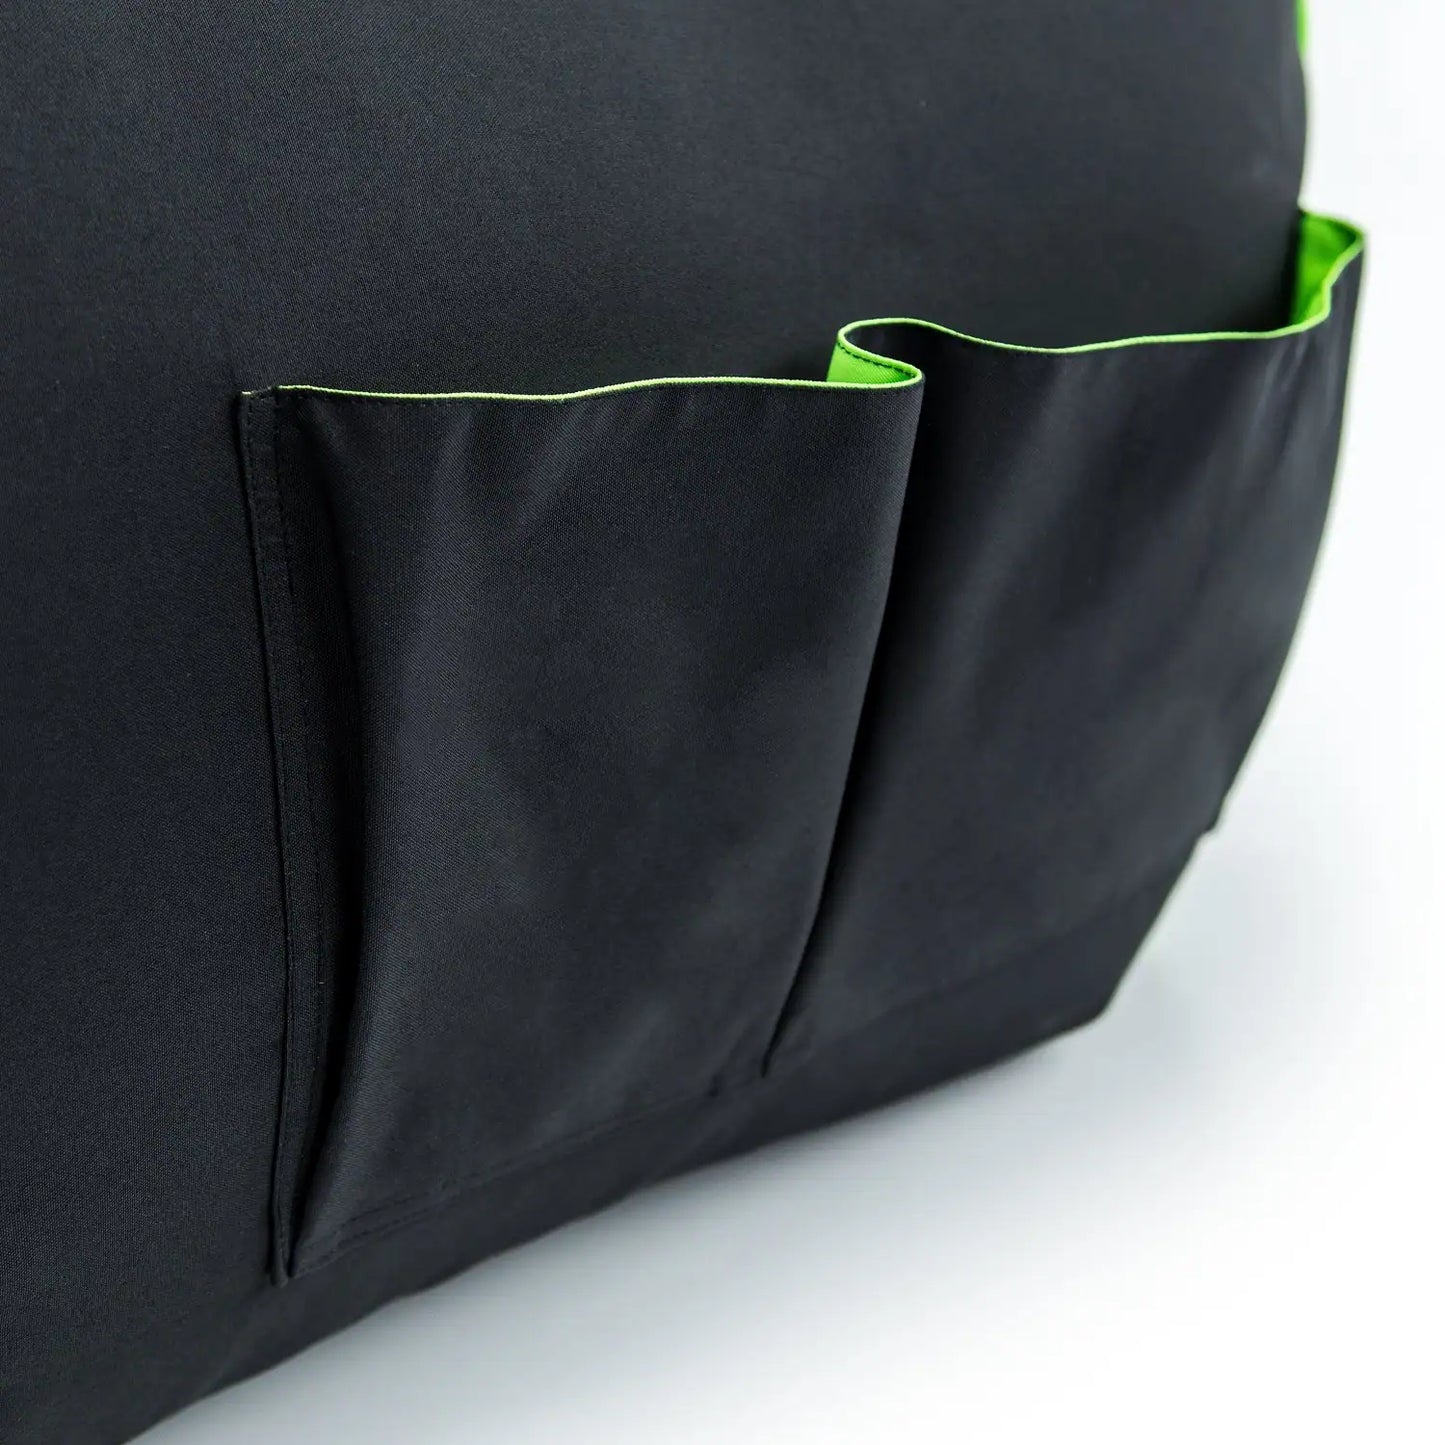 A black bag cover with a green pocket on the side, close-up.